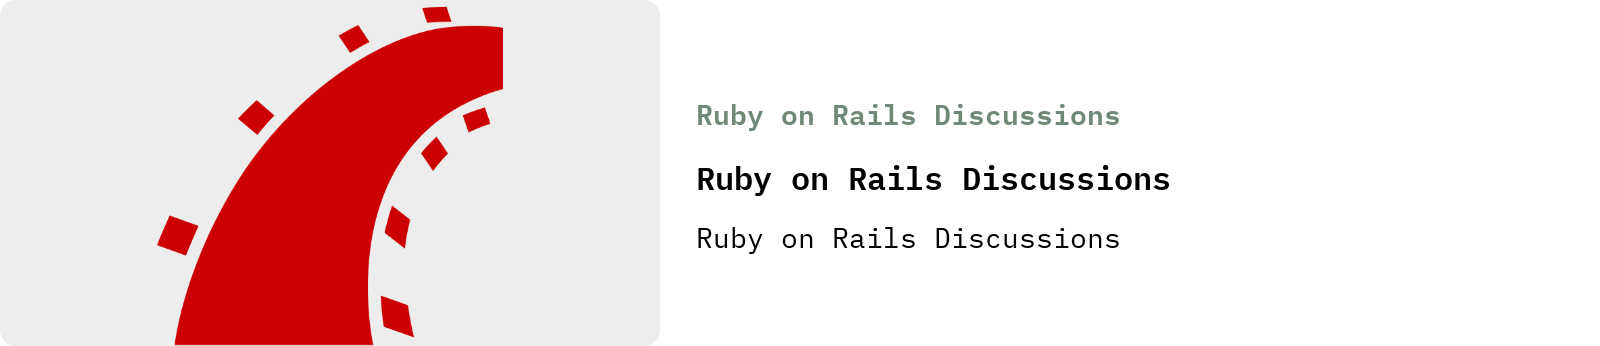 From Ruby on Rails Discussions: Ruby on Rails Discussions | Ruby on Rails Discussions